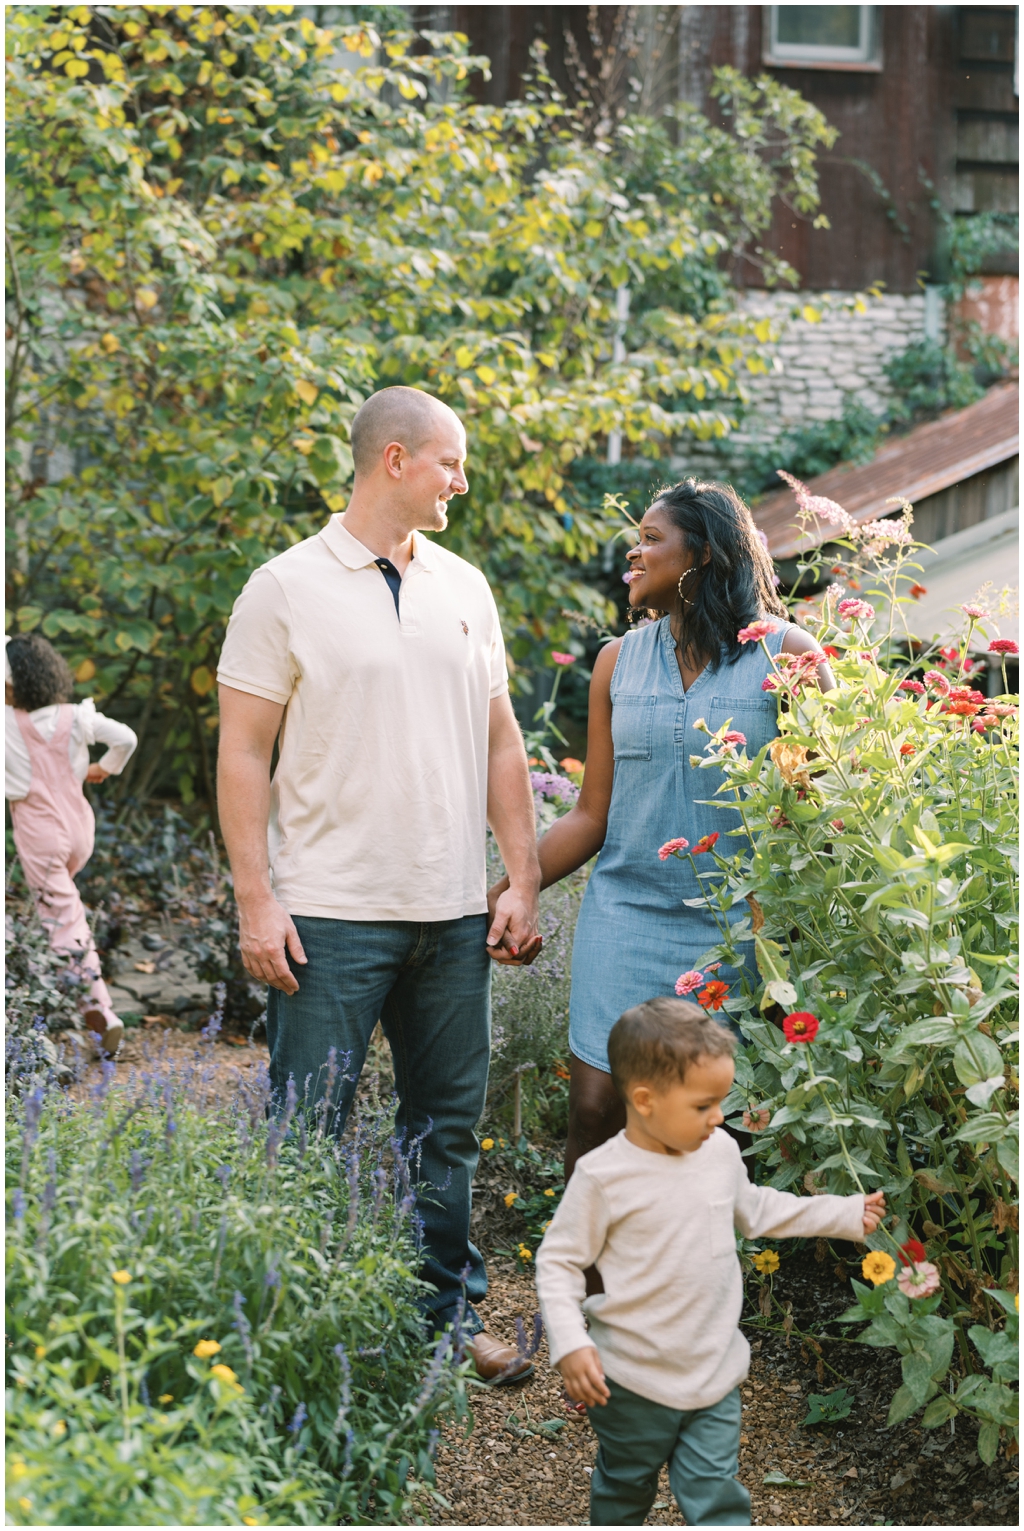 Dad, mom and their children play amongst flowers at Knoxville Botanical Gardens outside for their lifestyle family photo session.